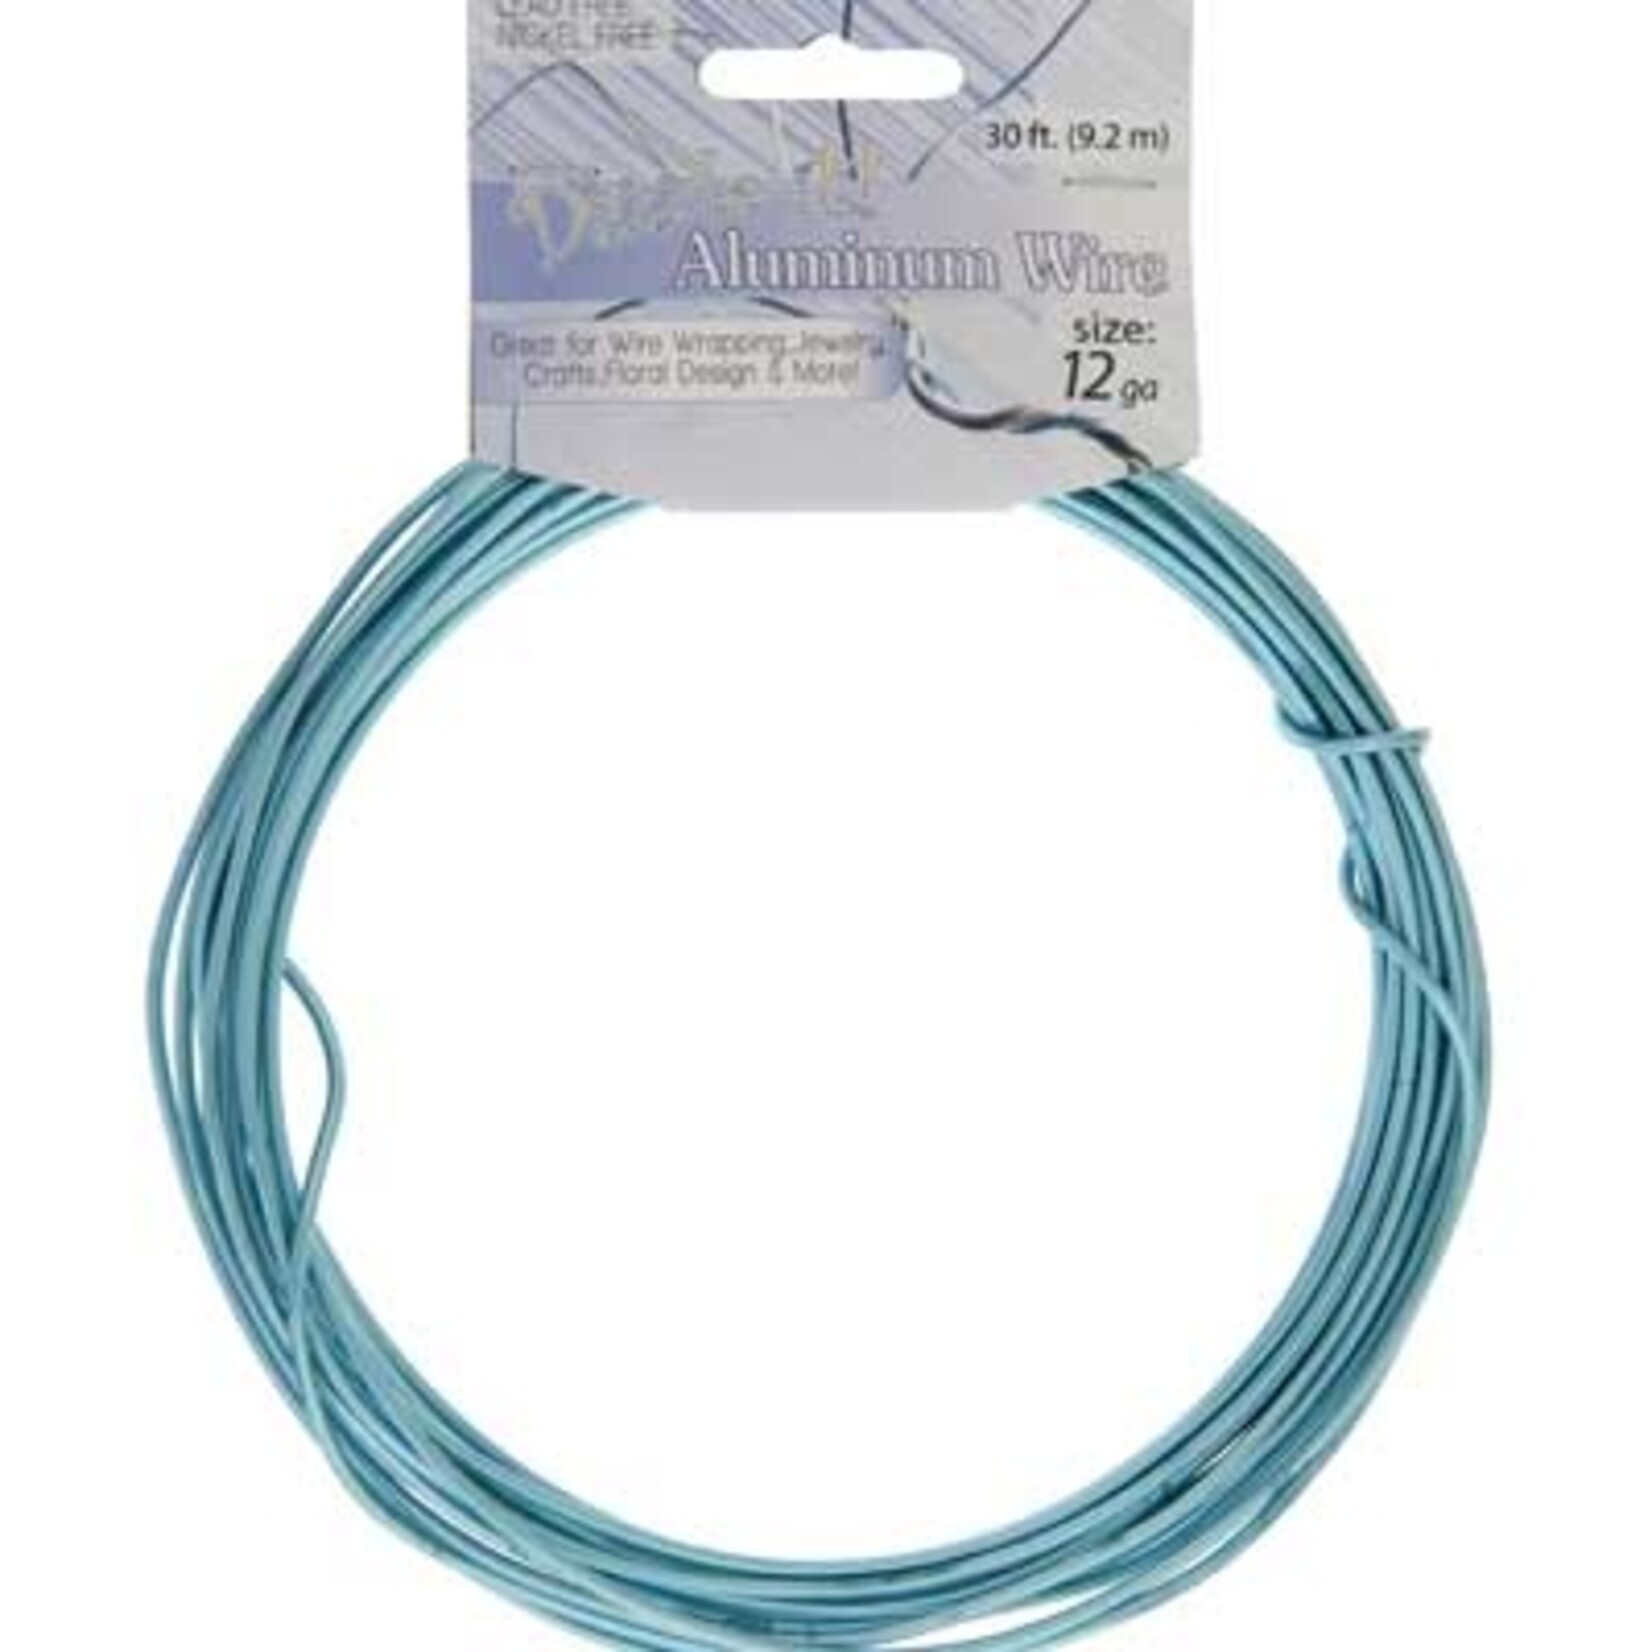 Aluminum Wire 30 Feet (9.2 meters) 12 Guage (2.5mm)